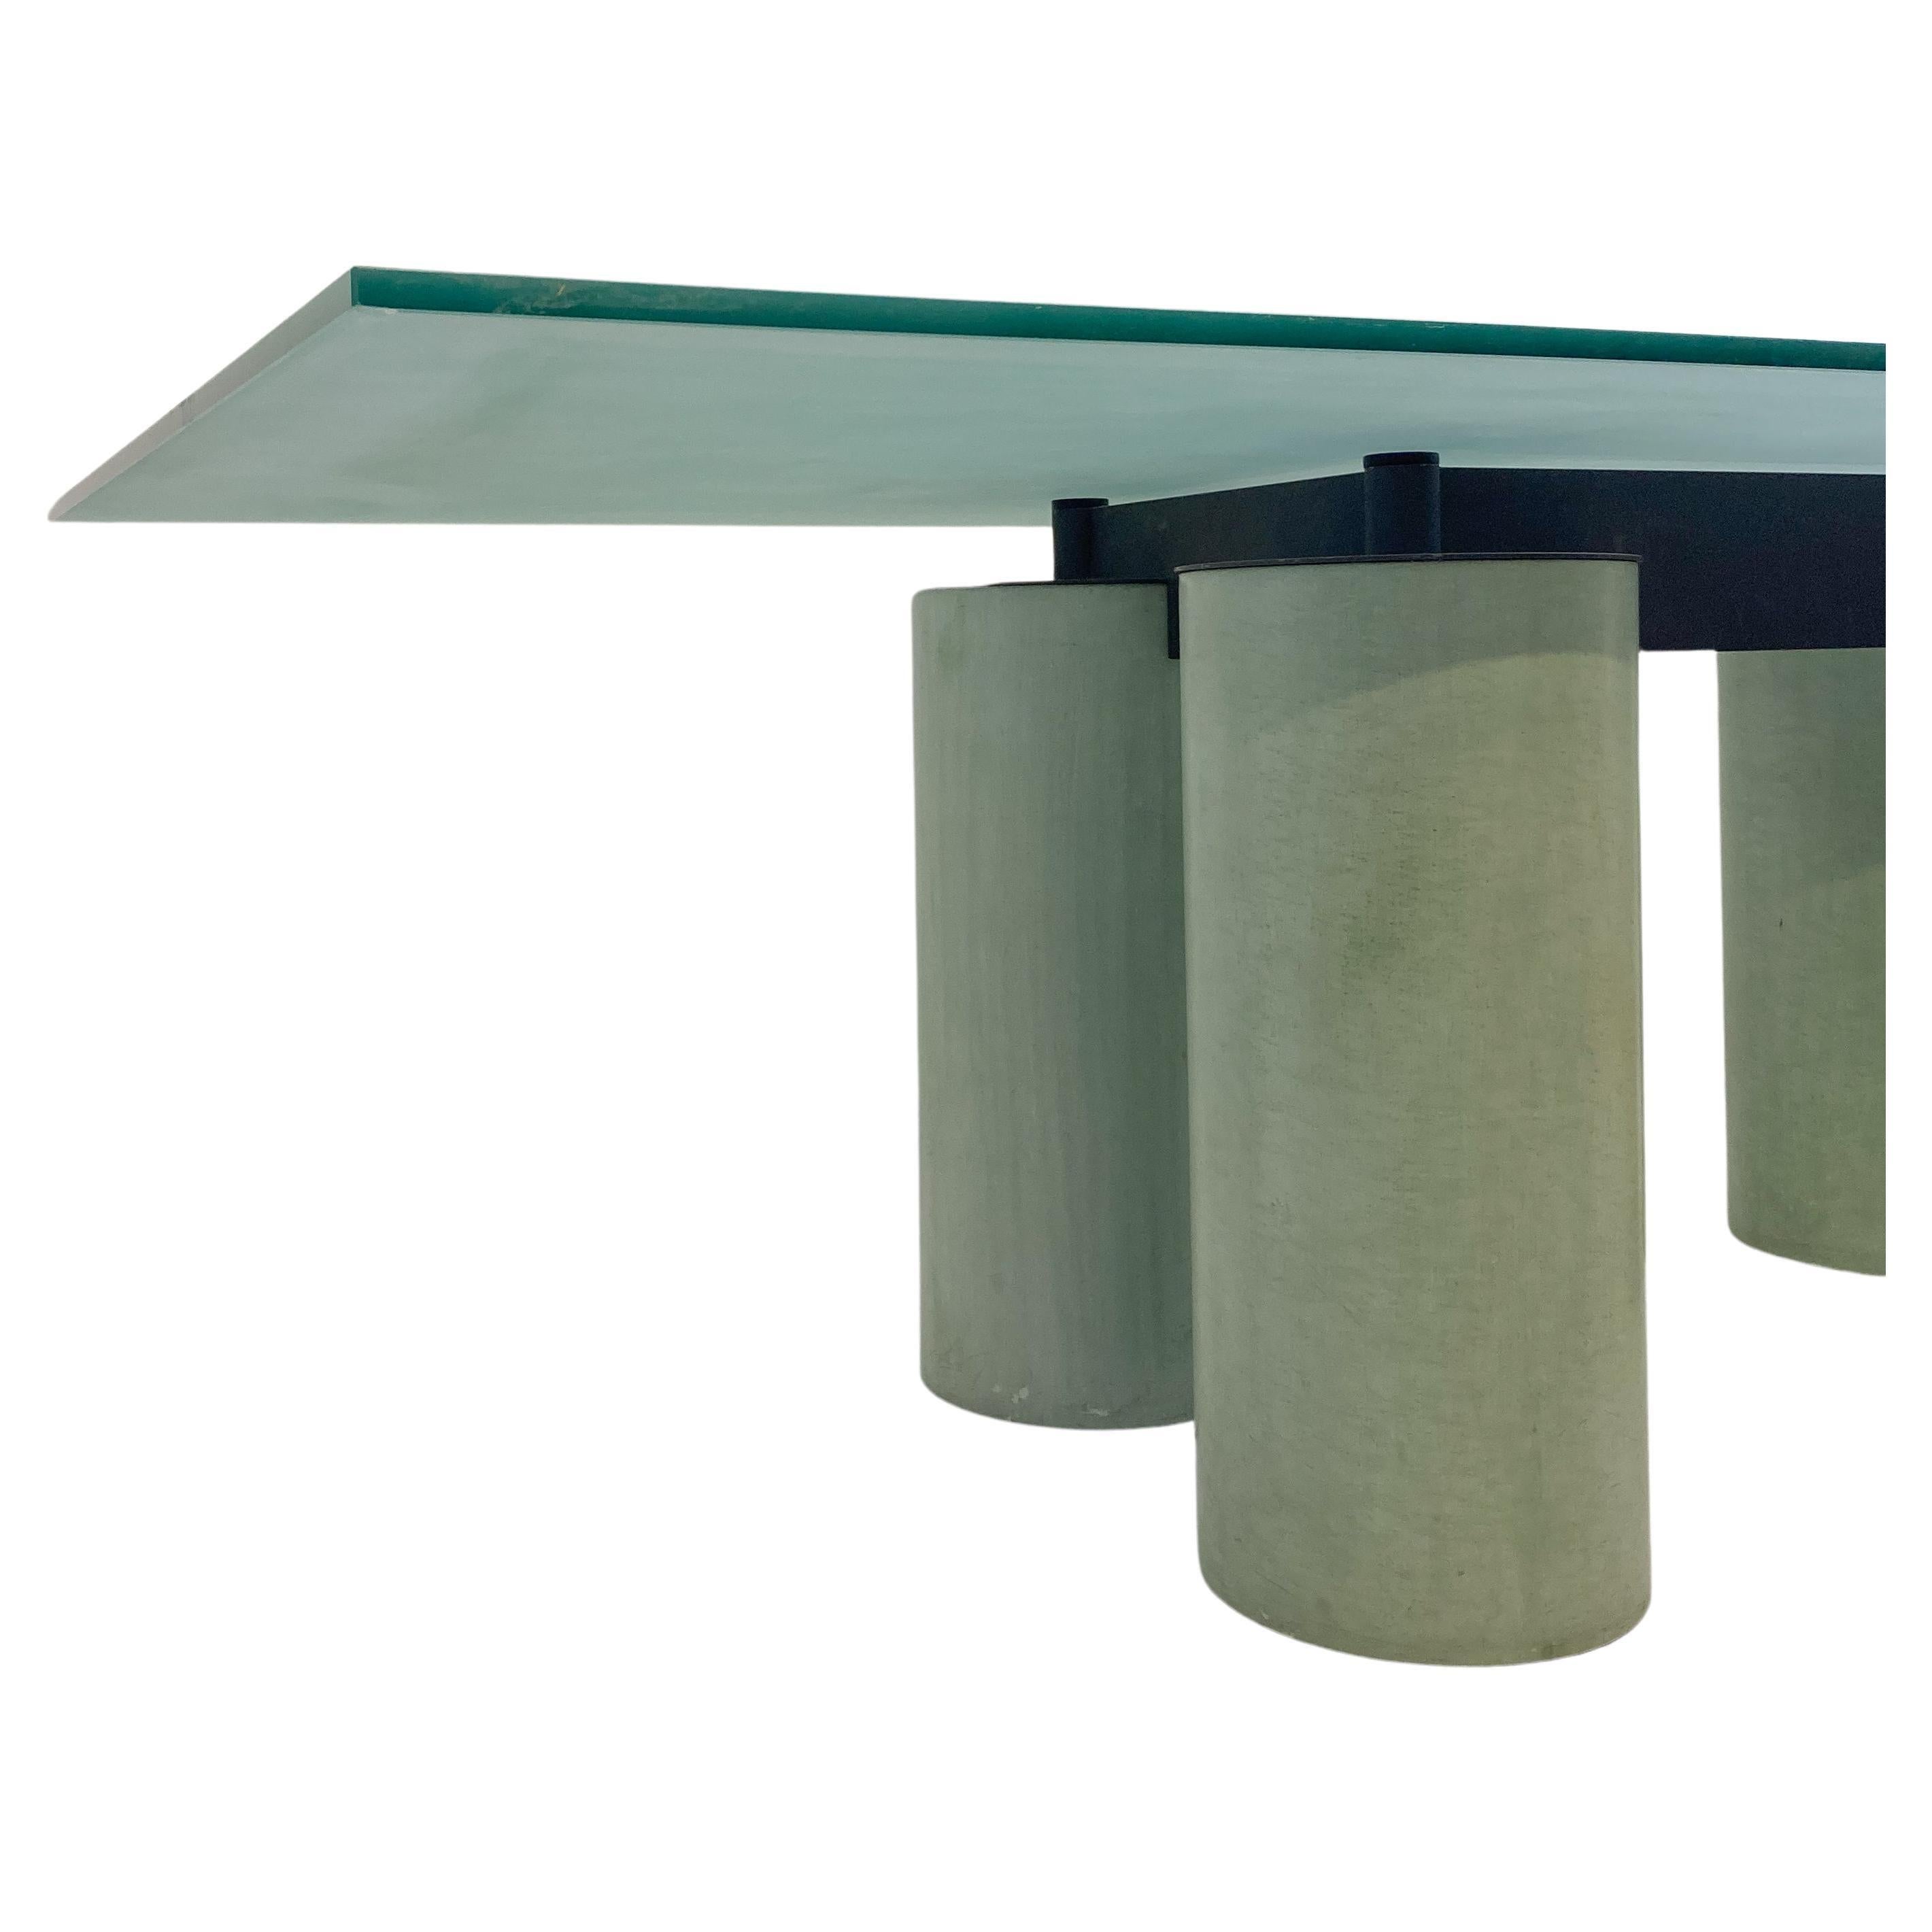 Mid-Century Modern 'Serenissima' Dining Table by Lella & Massimo Vignelli For Sale 3